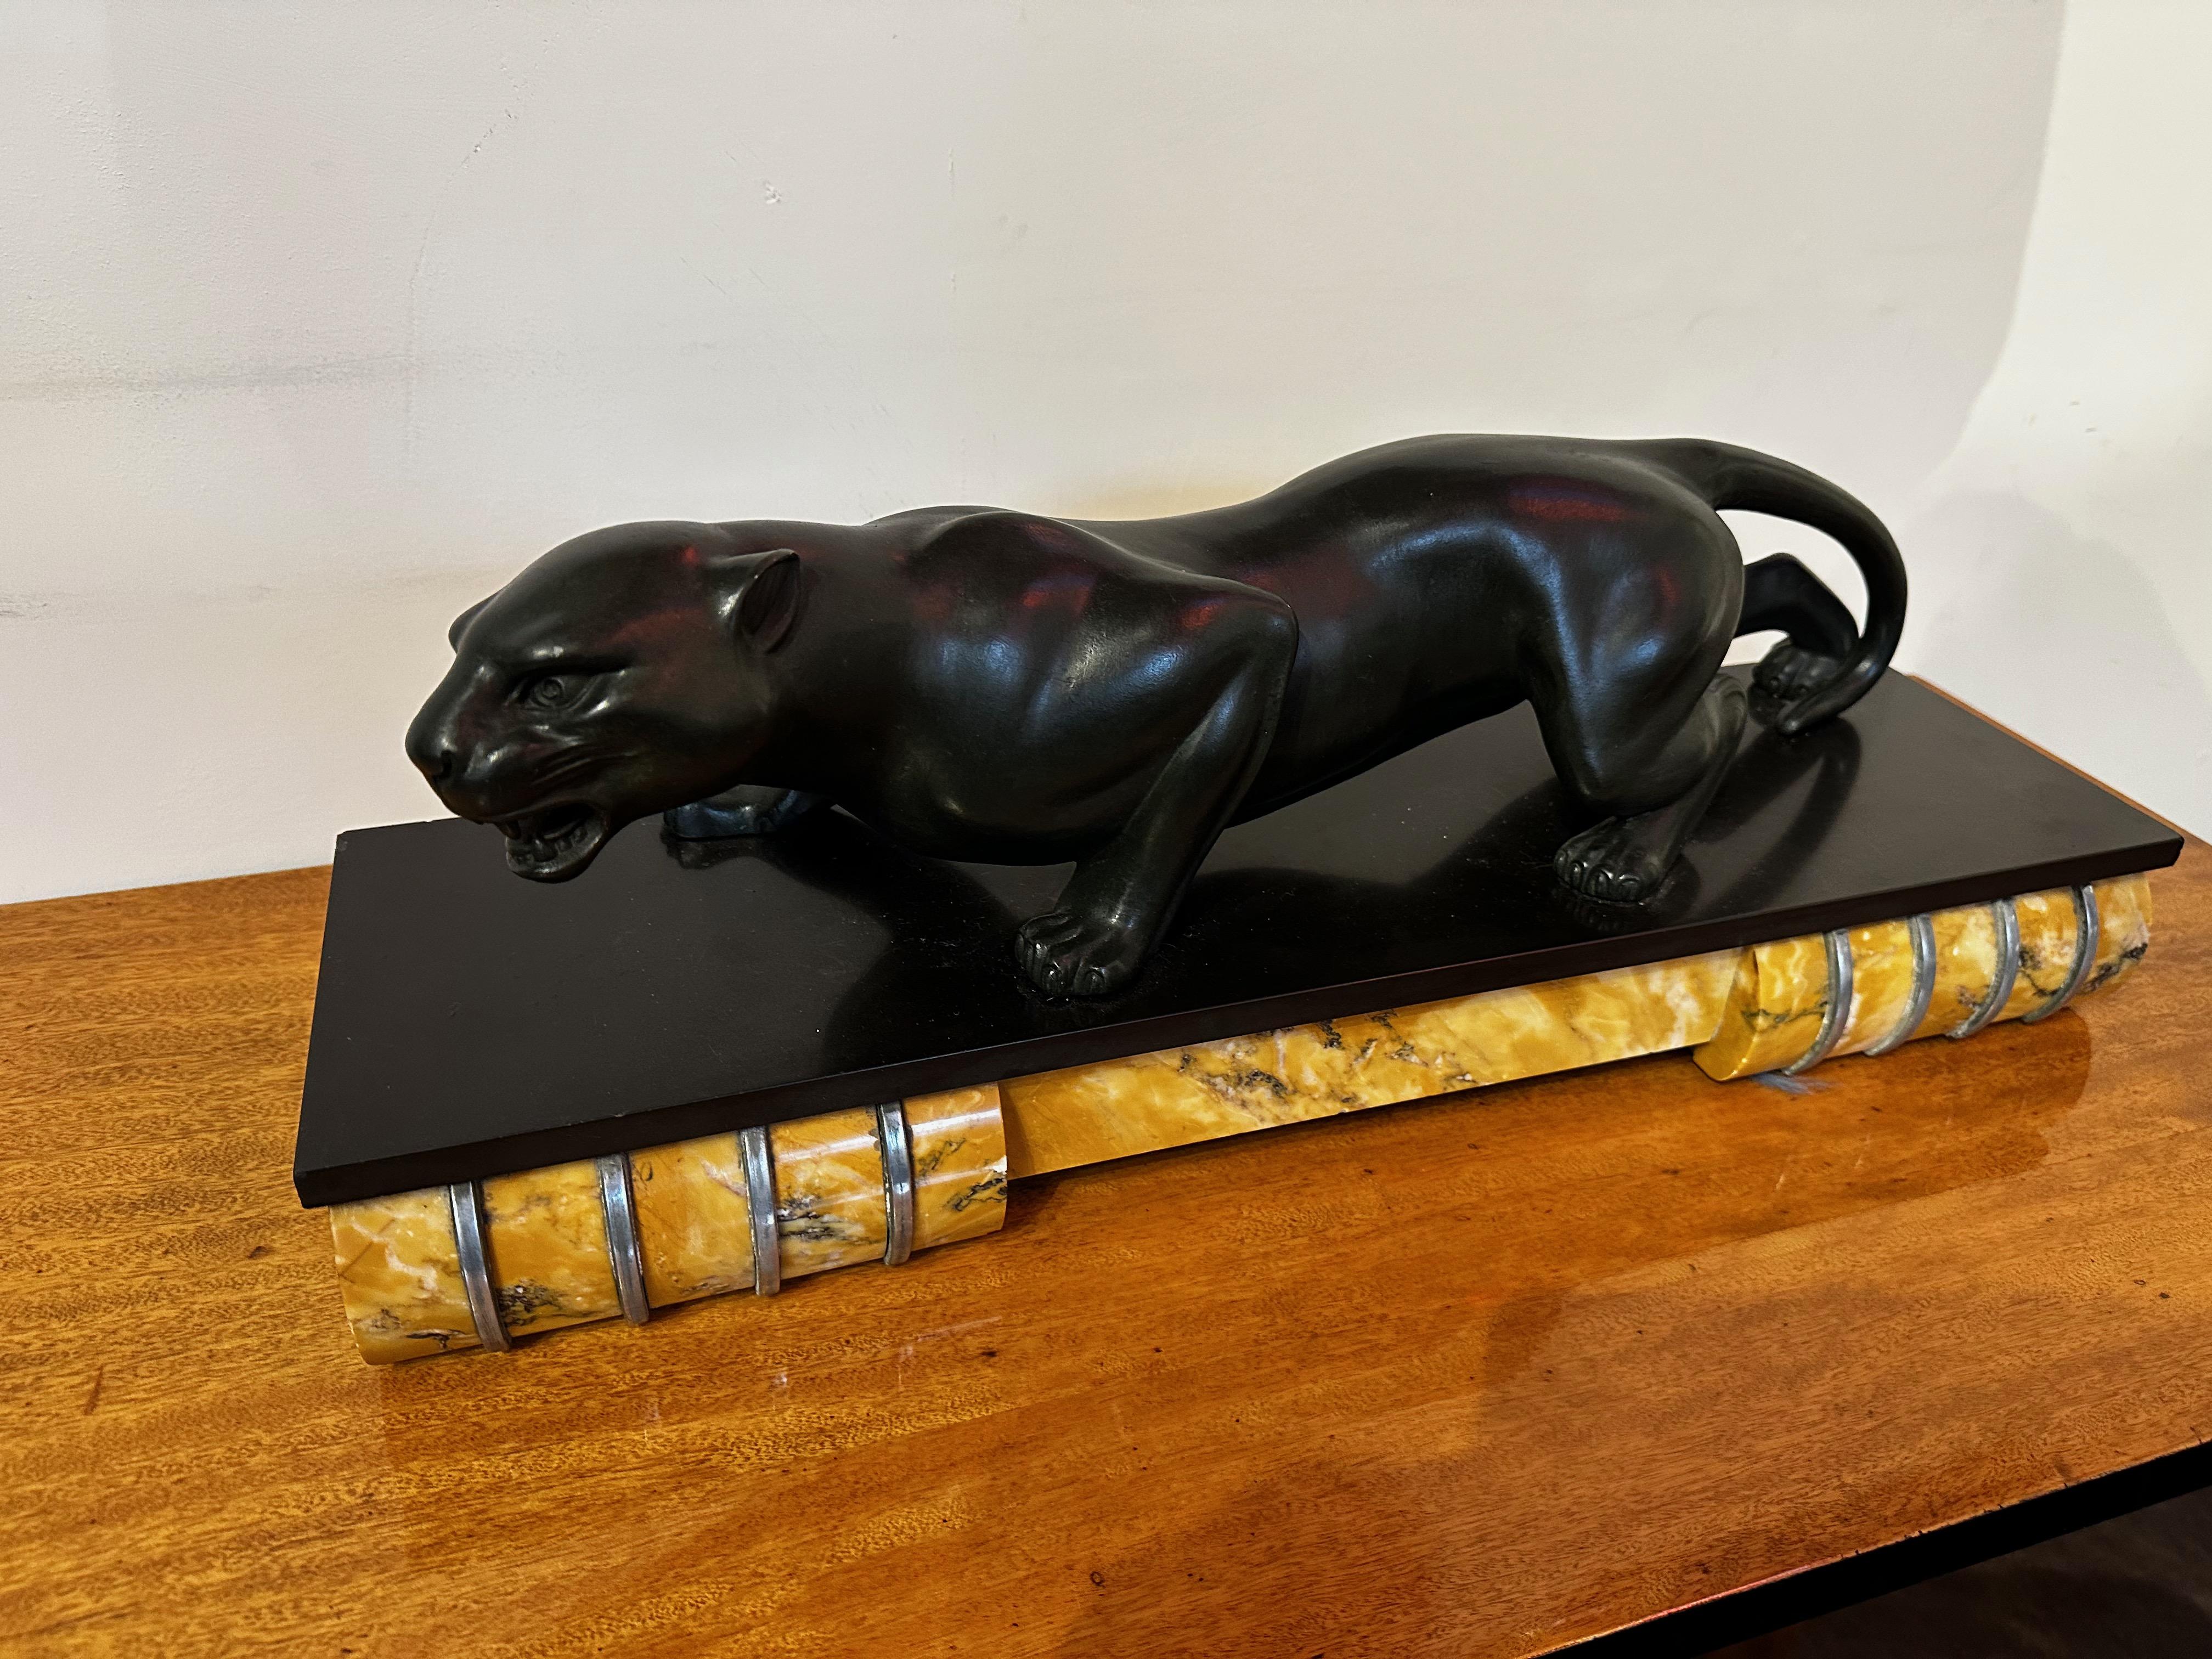 Black Panther Art Deco sculpture was designed and signed by Guy Debe. It features a black metal patinated material of the body of the panther which is a blend of metals called regul based on bronze. The sculptural panther you see resting on top of a